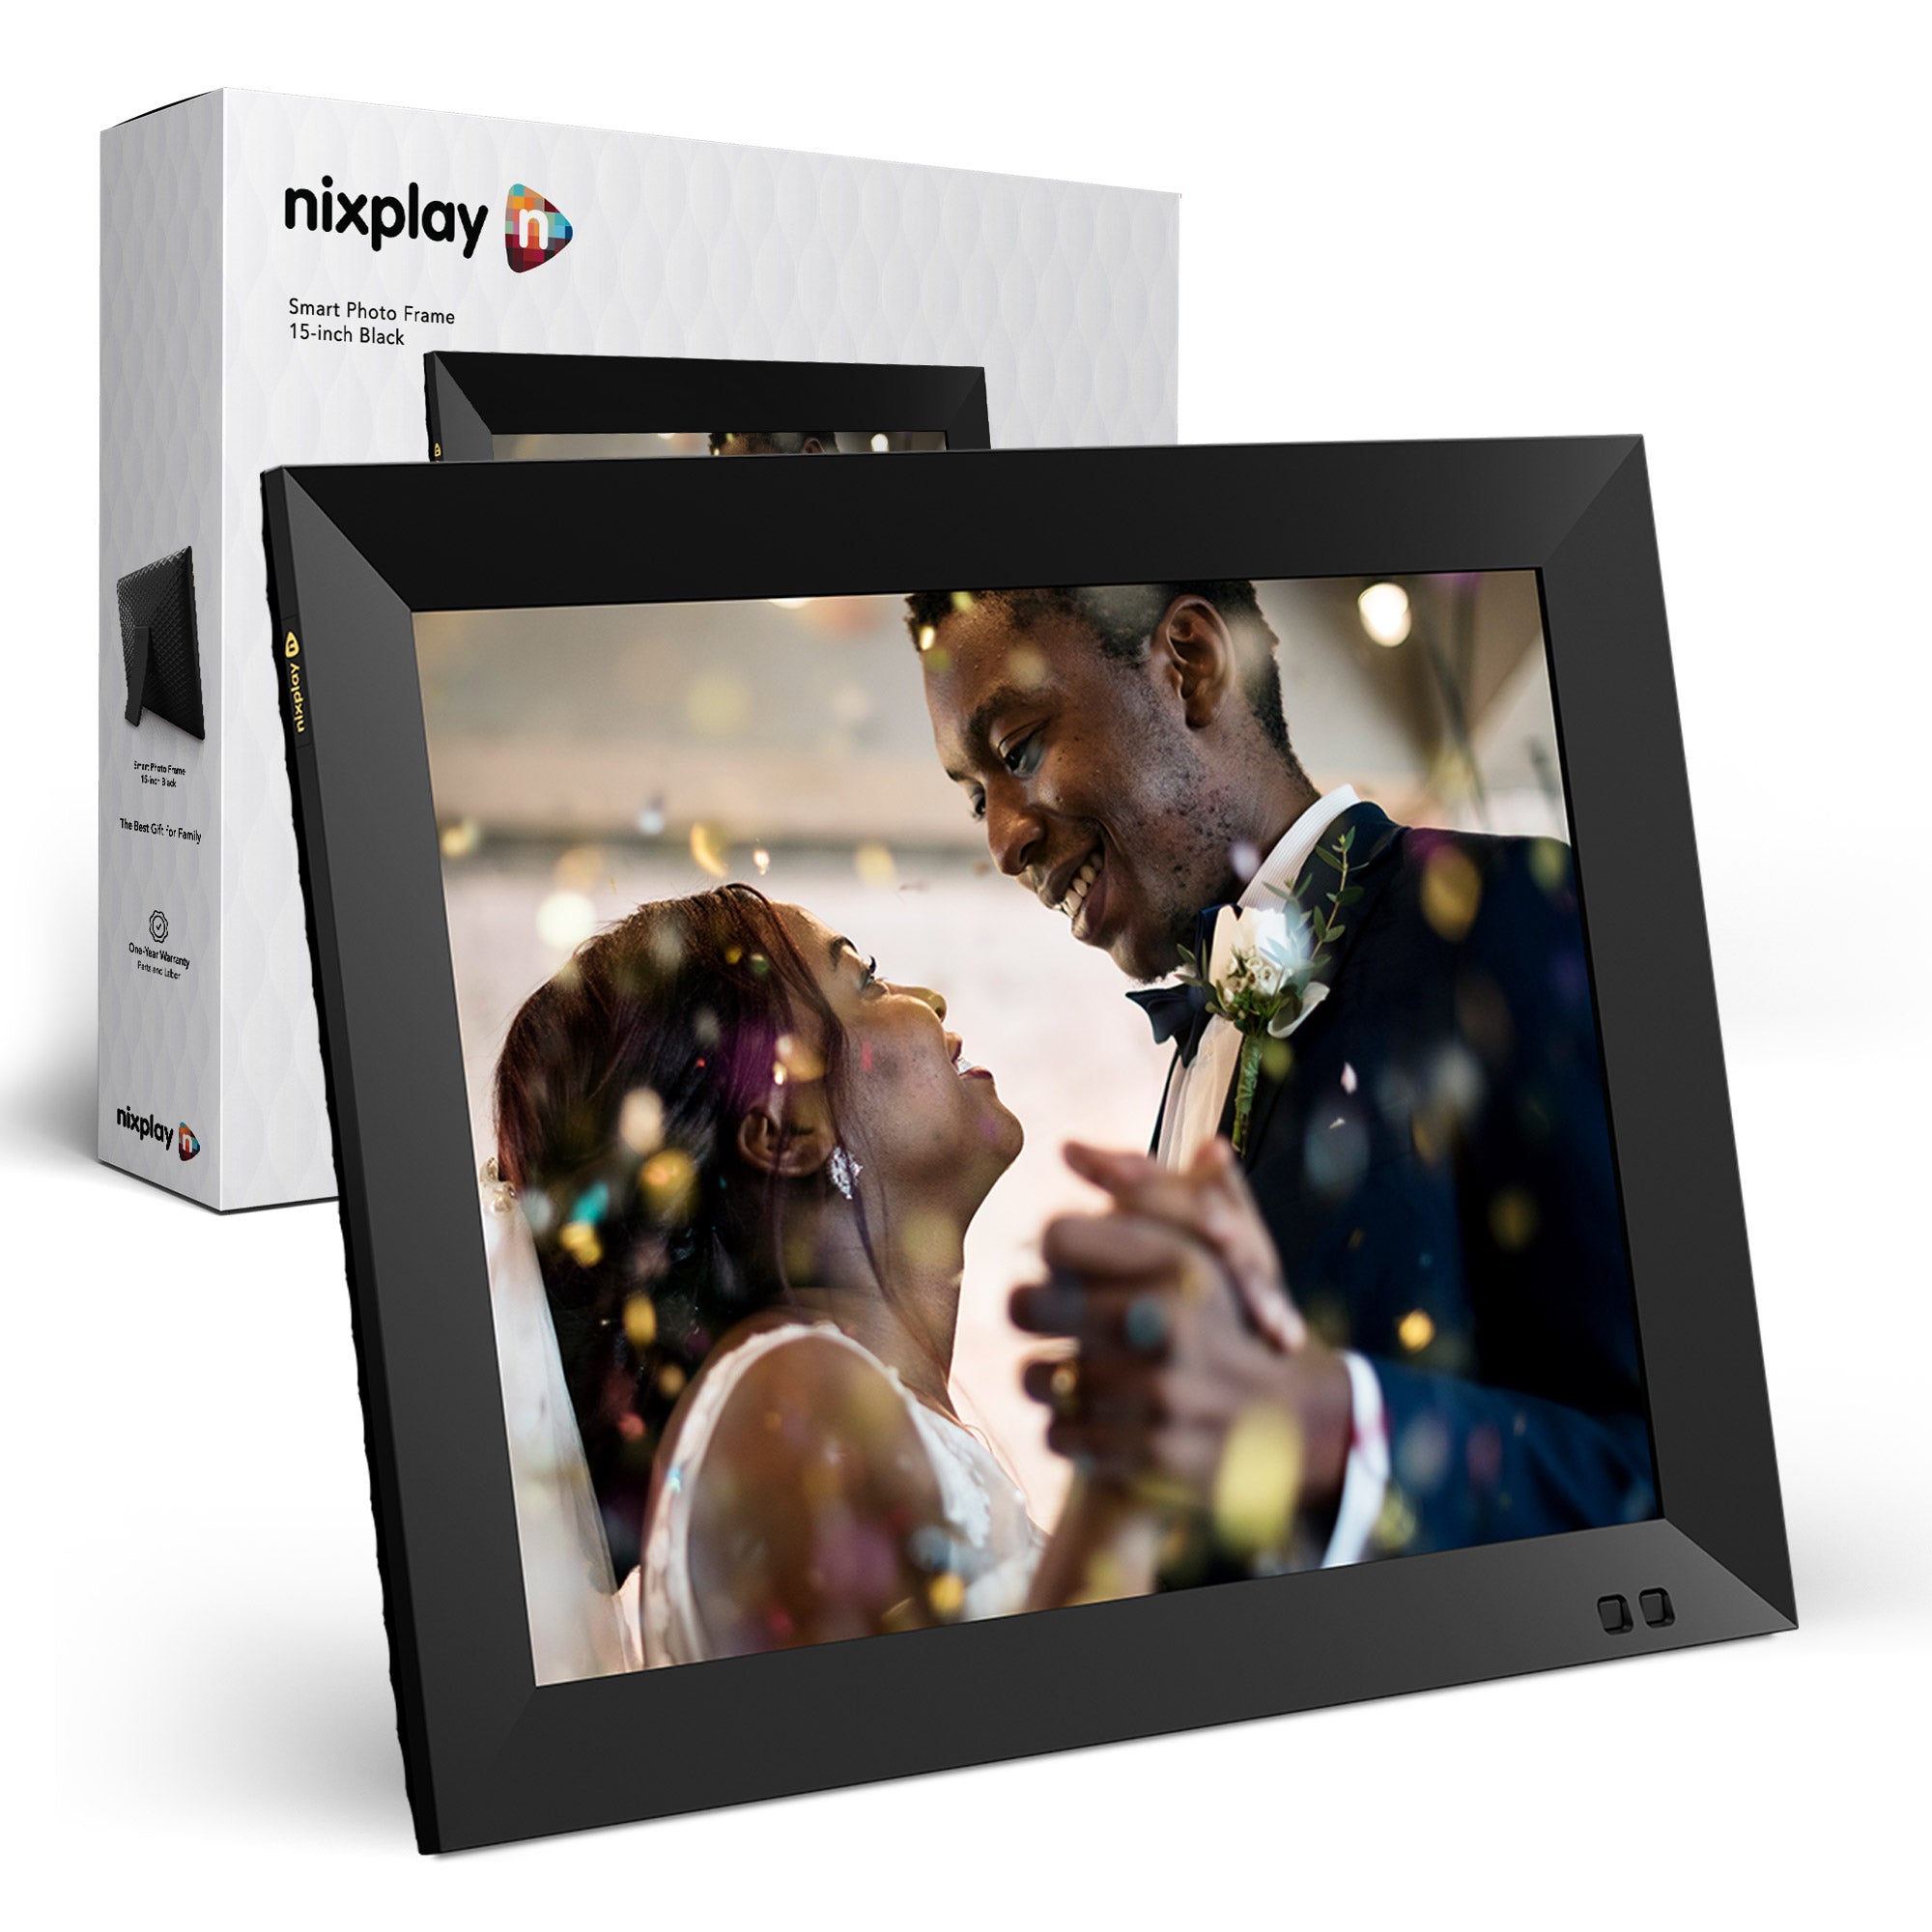 Pix-Star 15 inch WiFi Digital Picture Frame | Share Videos and Photos  Instantly by Email or App | Motion Sensor | IPS Display | Effortless One  Minute